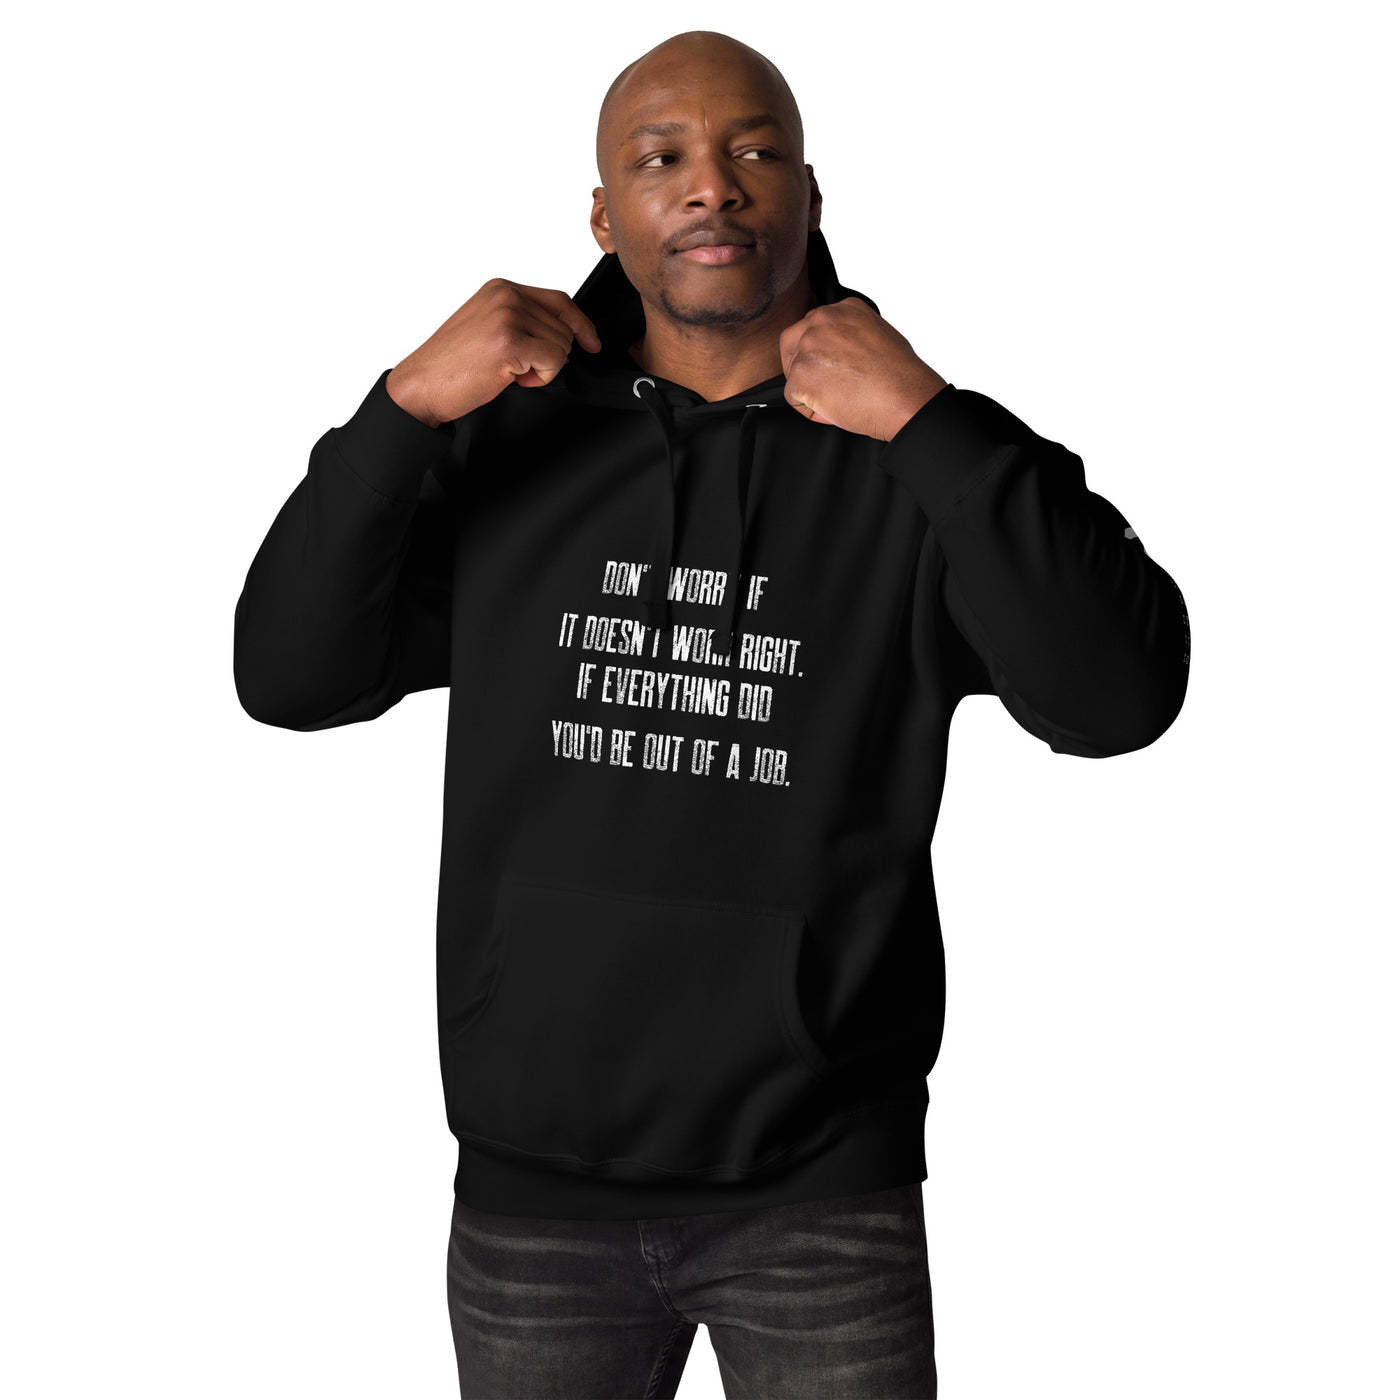 Don't worry if it doesn't work right: if everything did, you would be out of your job V2 - Unisex Hoodie